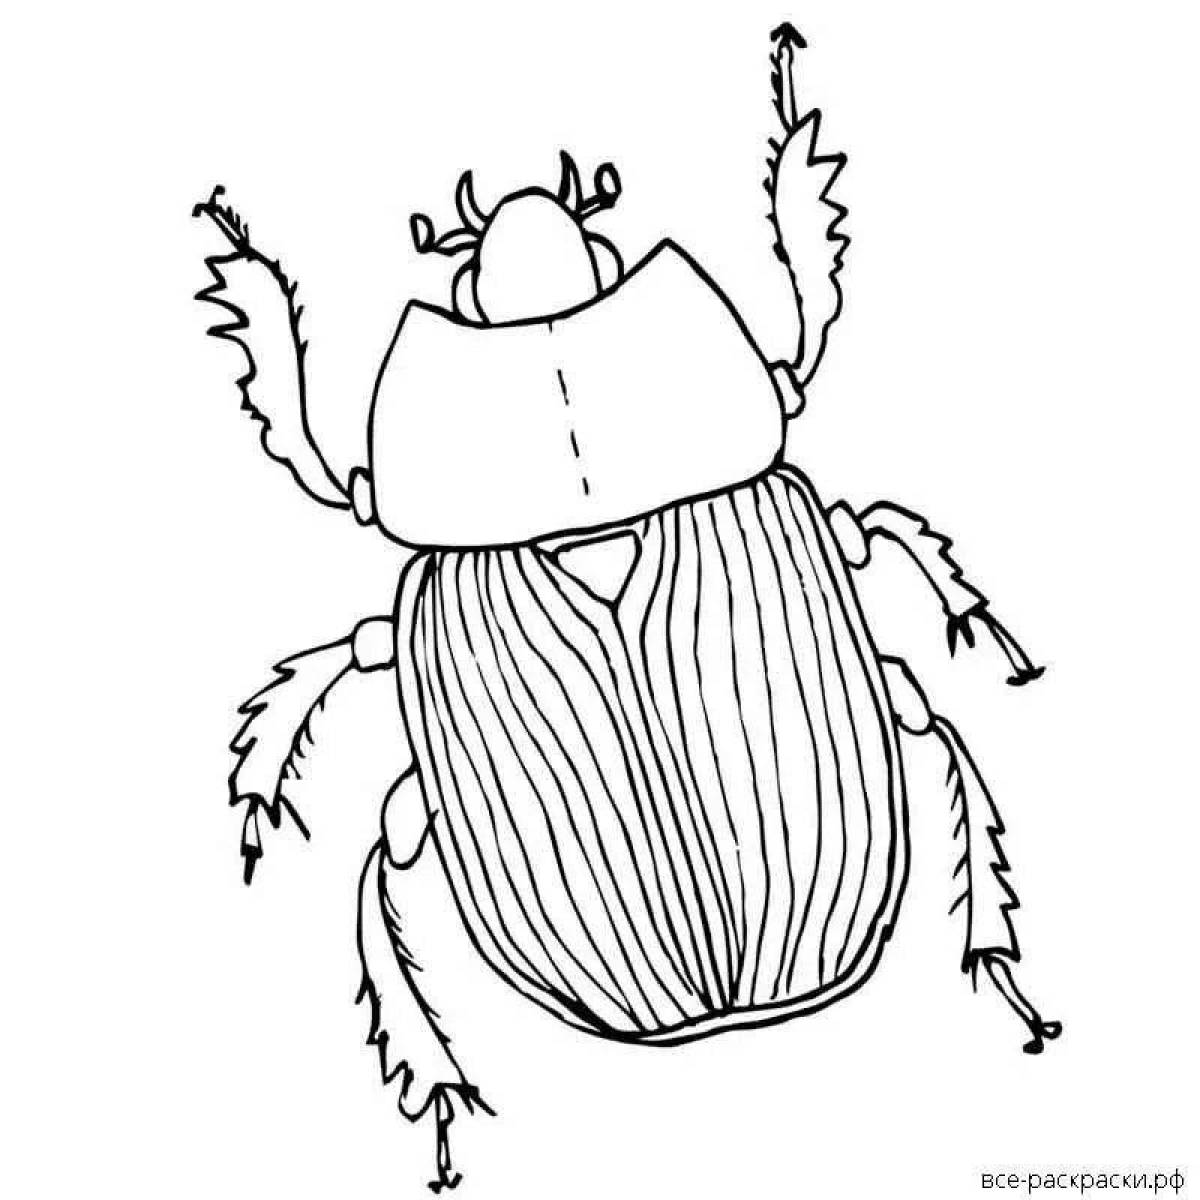 Adorable beetle coloring book for kids